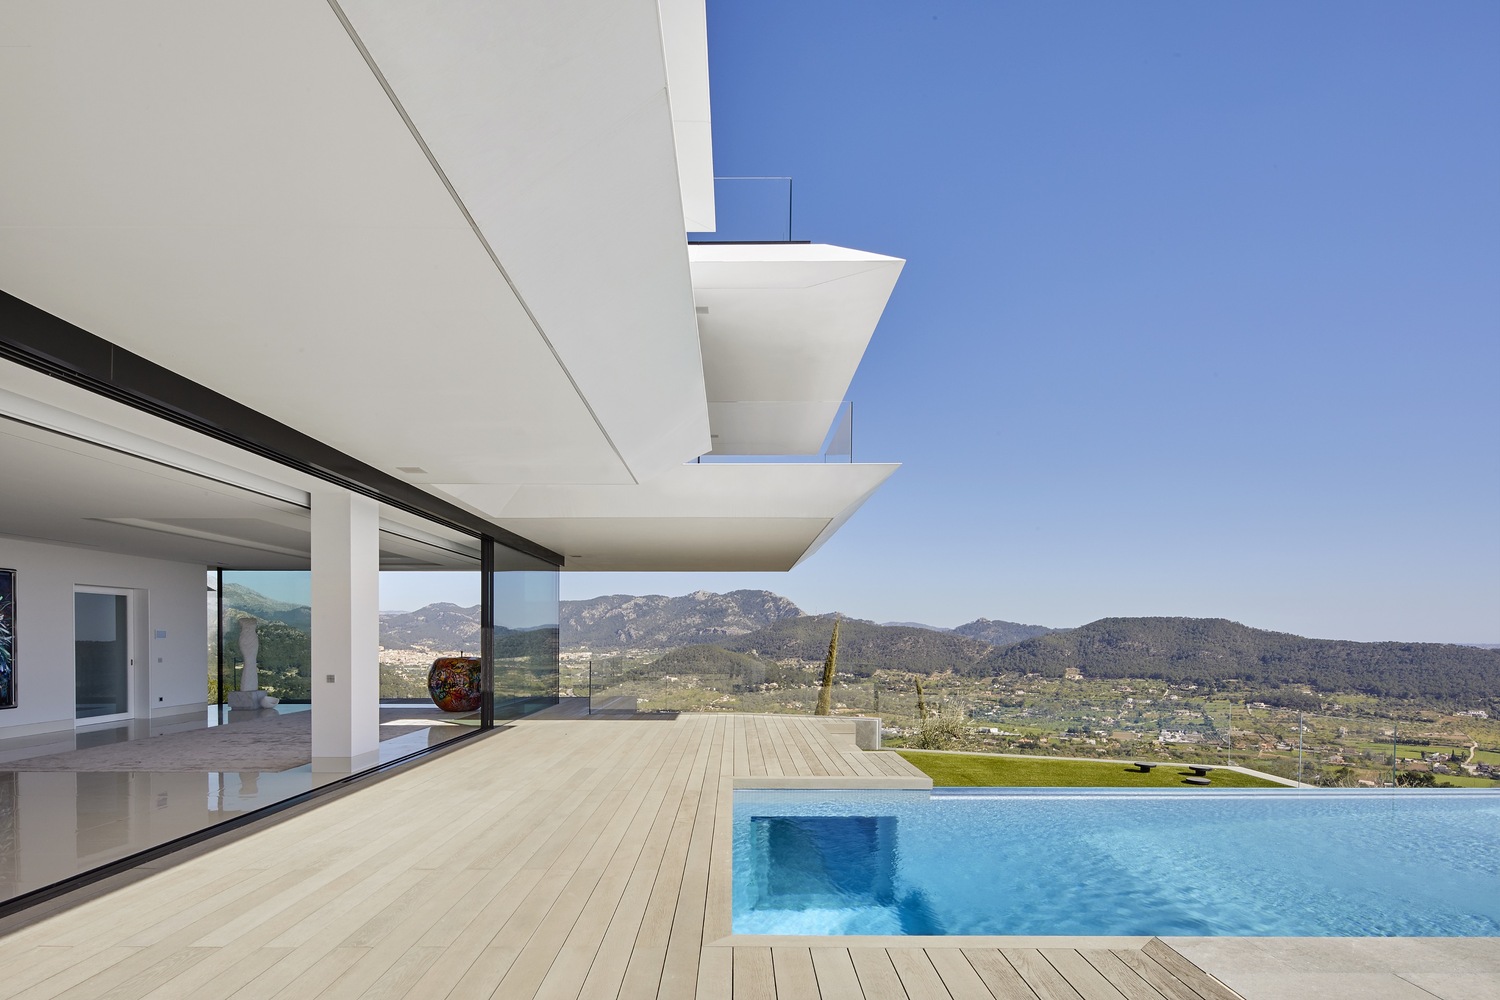 House Modern Luxury Mansions Architecture Swimming Pool 1500x1000